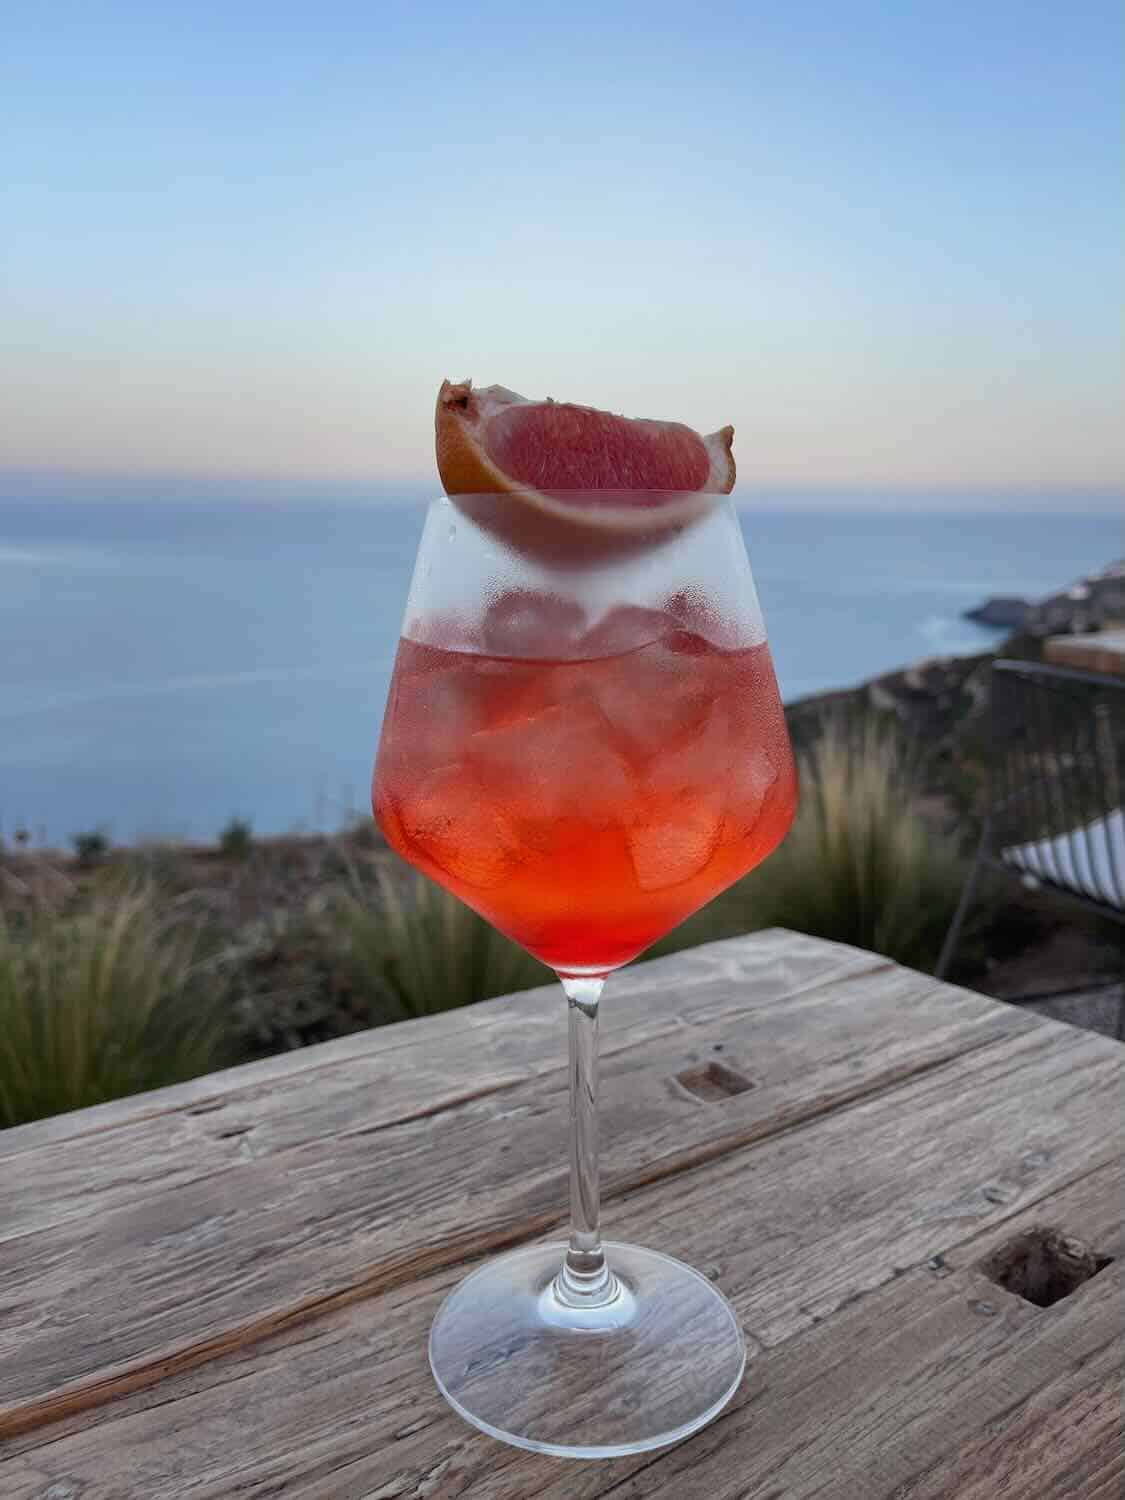 A refreshing cocktail adorned with a slice of grapefruit, resting on a rustic wooden table with a scenic view of the Sifnos coastline, a perfect sip stop on a Sifnos itinerary.